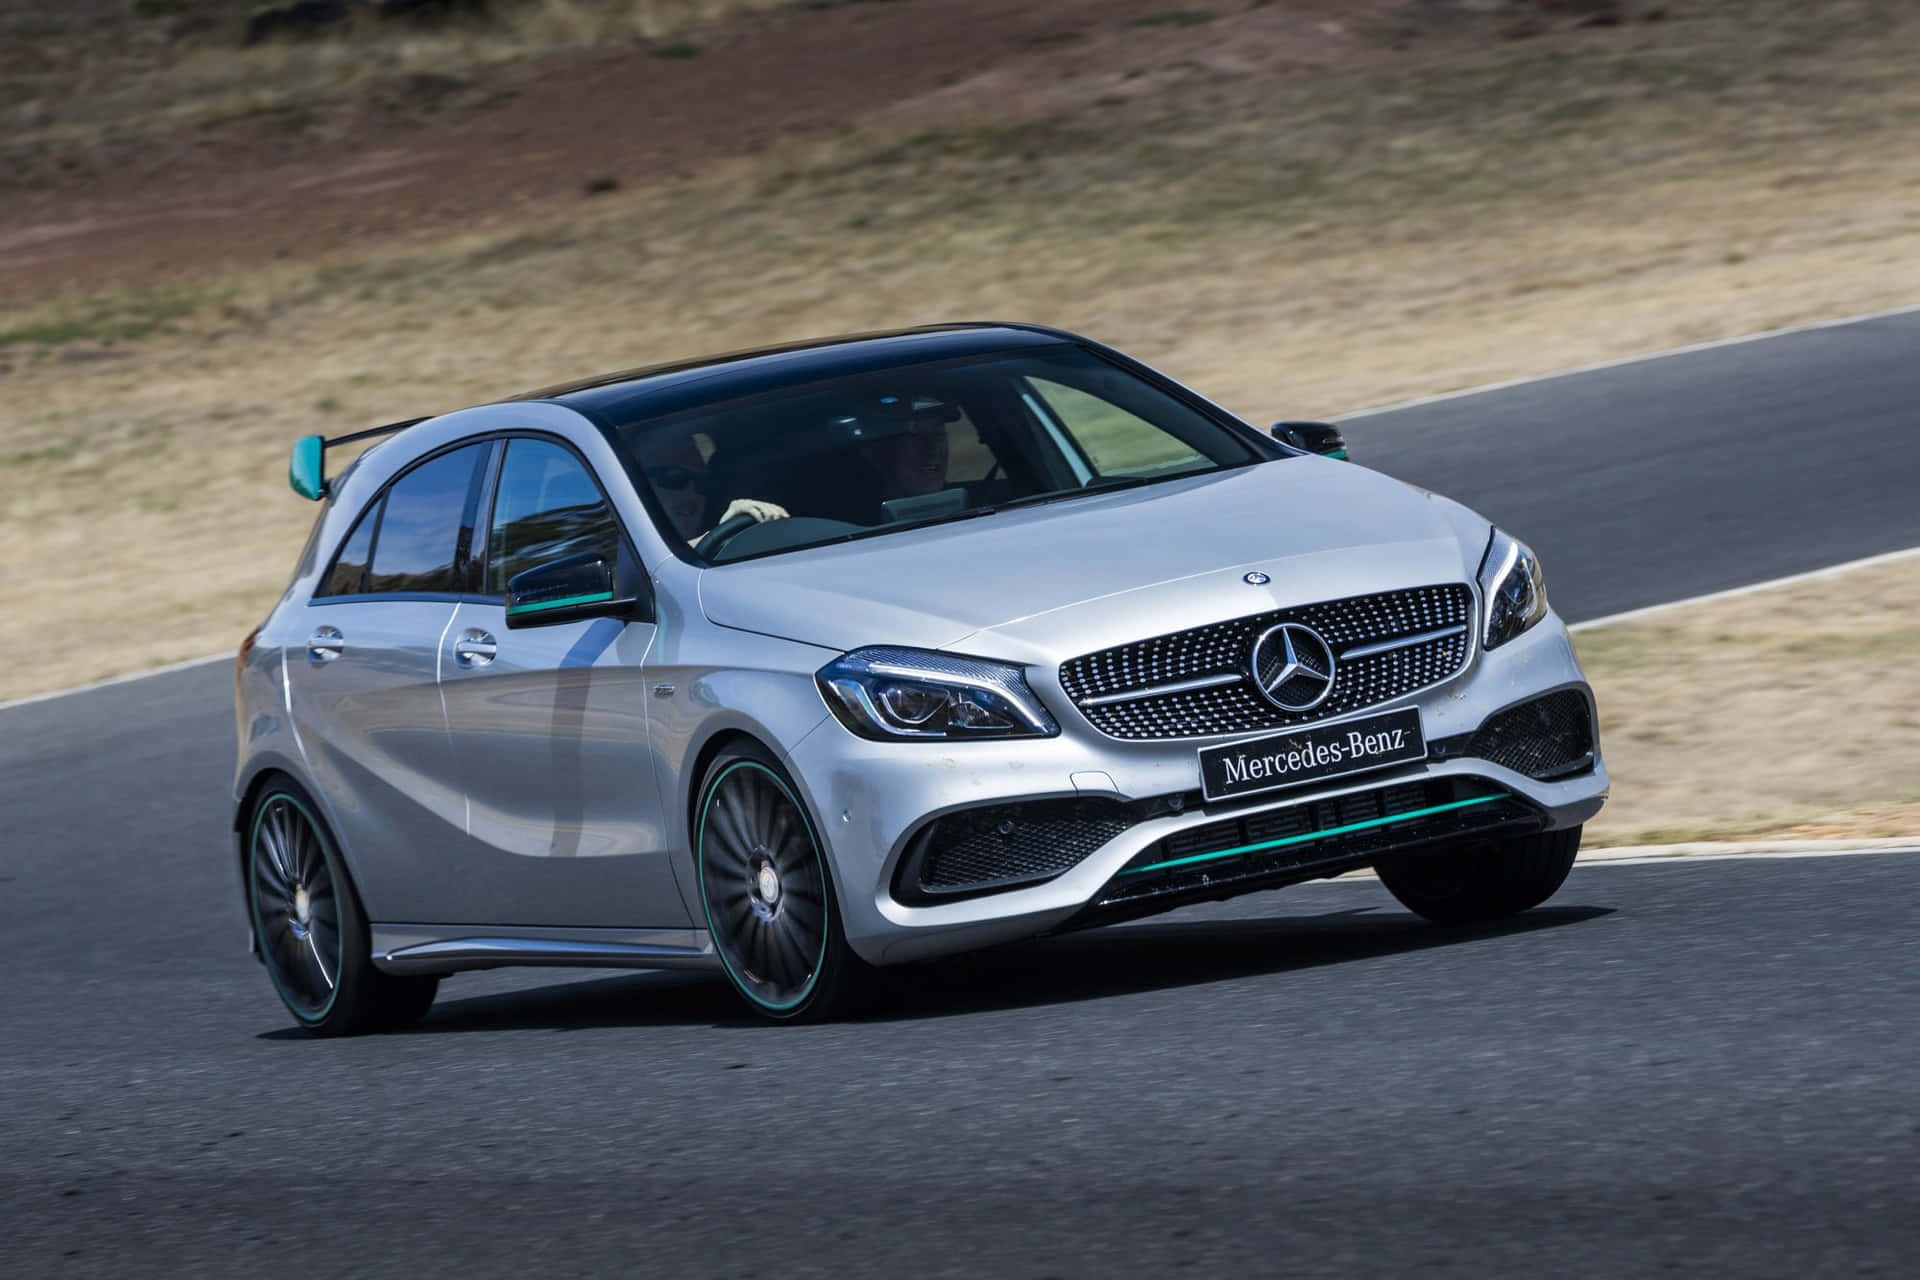 Sleek and Stylish Mercedes Benz A-Class in Action Wallpaper